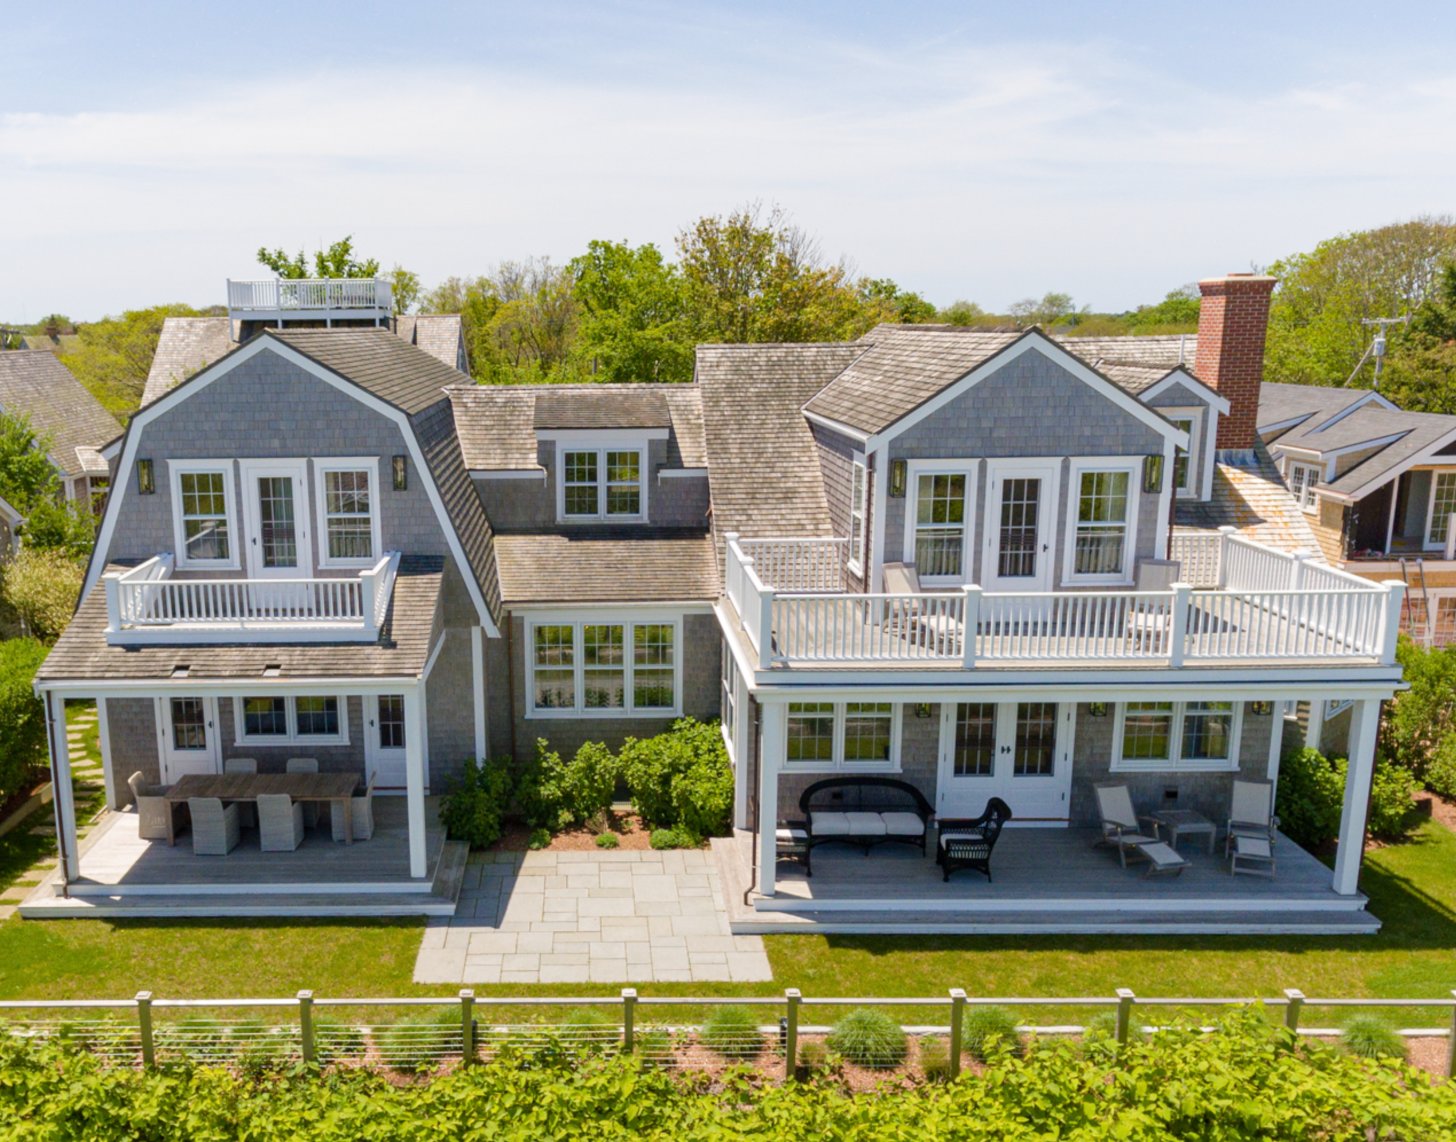 Located off prestigious Cliff Road, just steps from historic downtown Nantucket, the island’s best shops and restaurants, and around the corner from an abundance of family-friendly beaches, this four-bedroom, five-and-a-half bathroom home has sweeping harbor views.